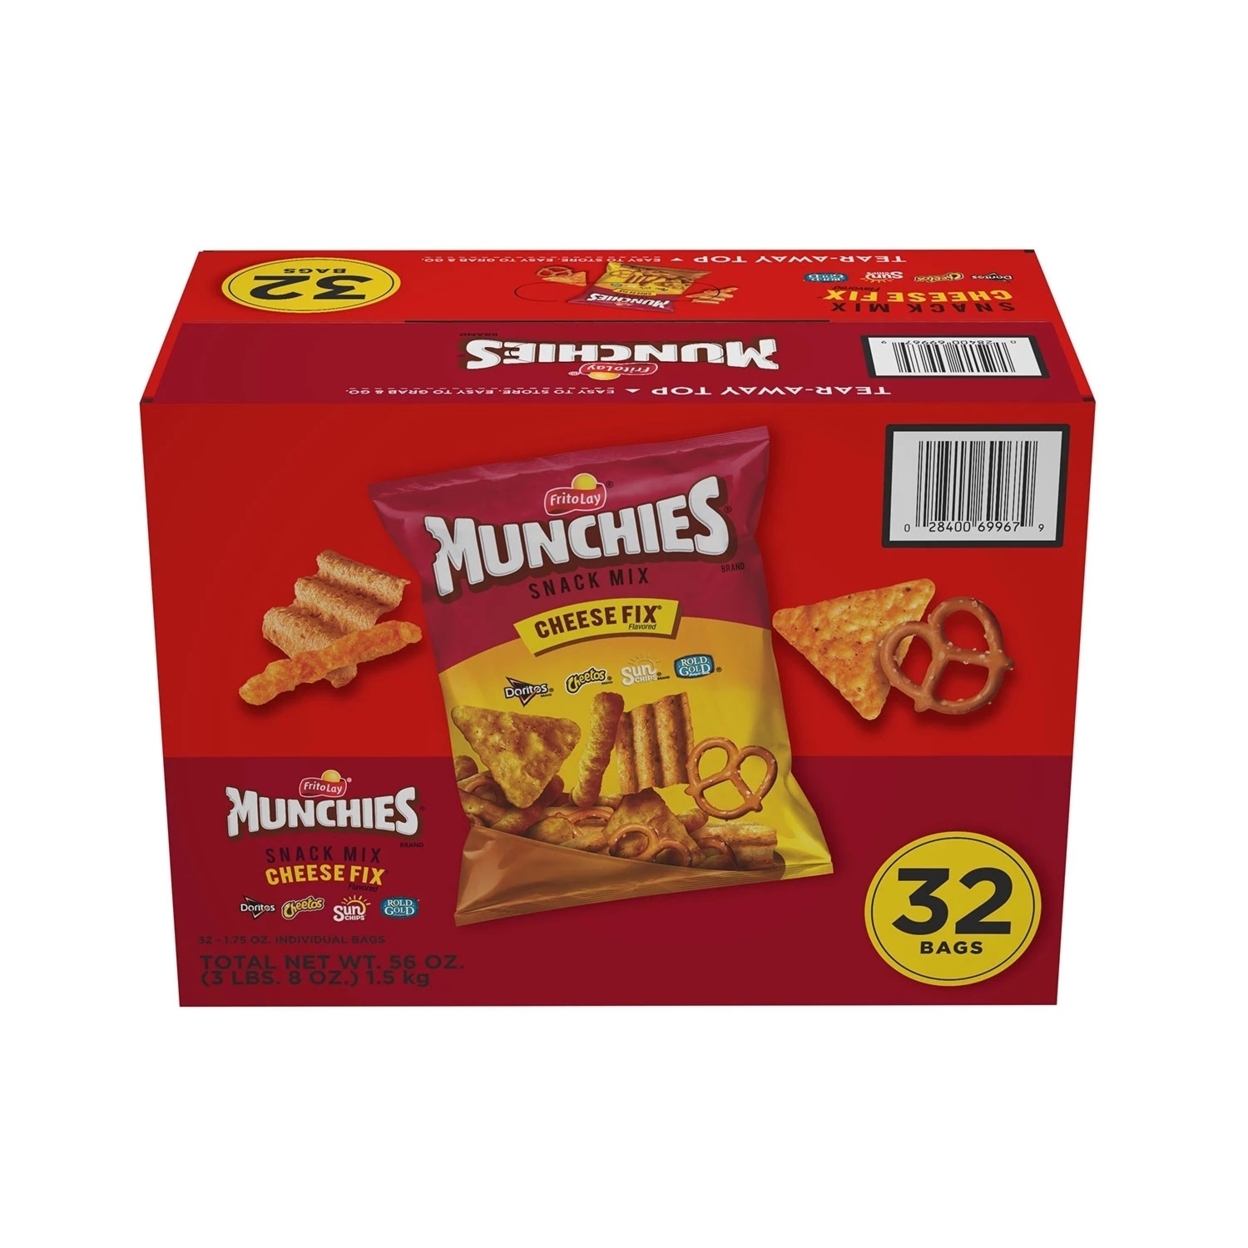 Munchies Snack Mix Cheese Fix, 1.75 Ounce (Pack Of 32)